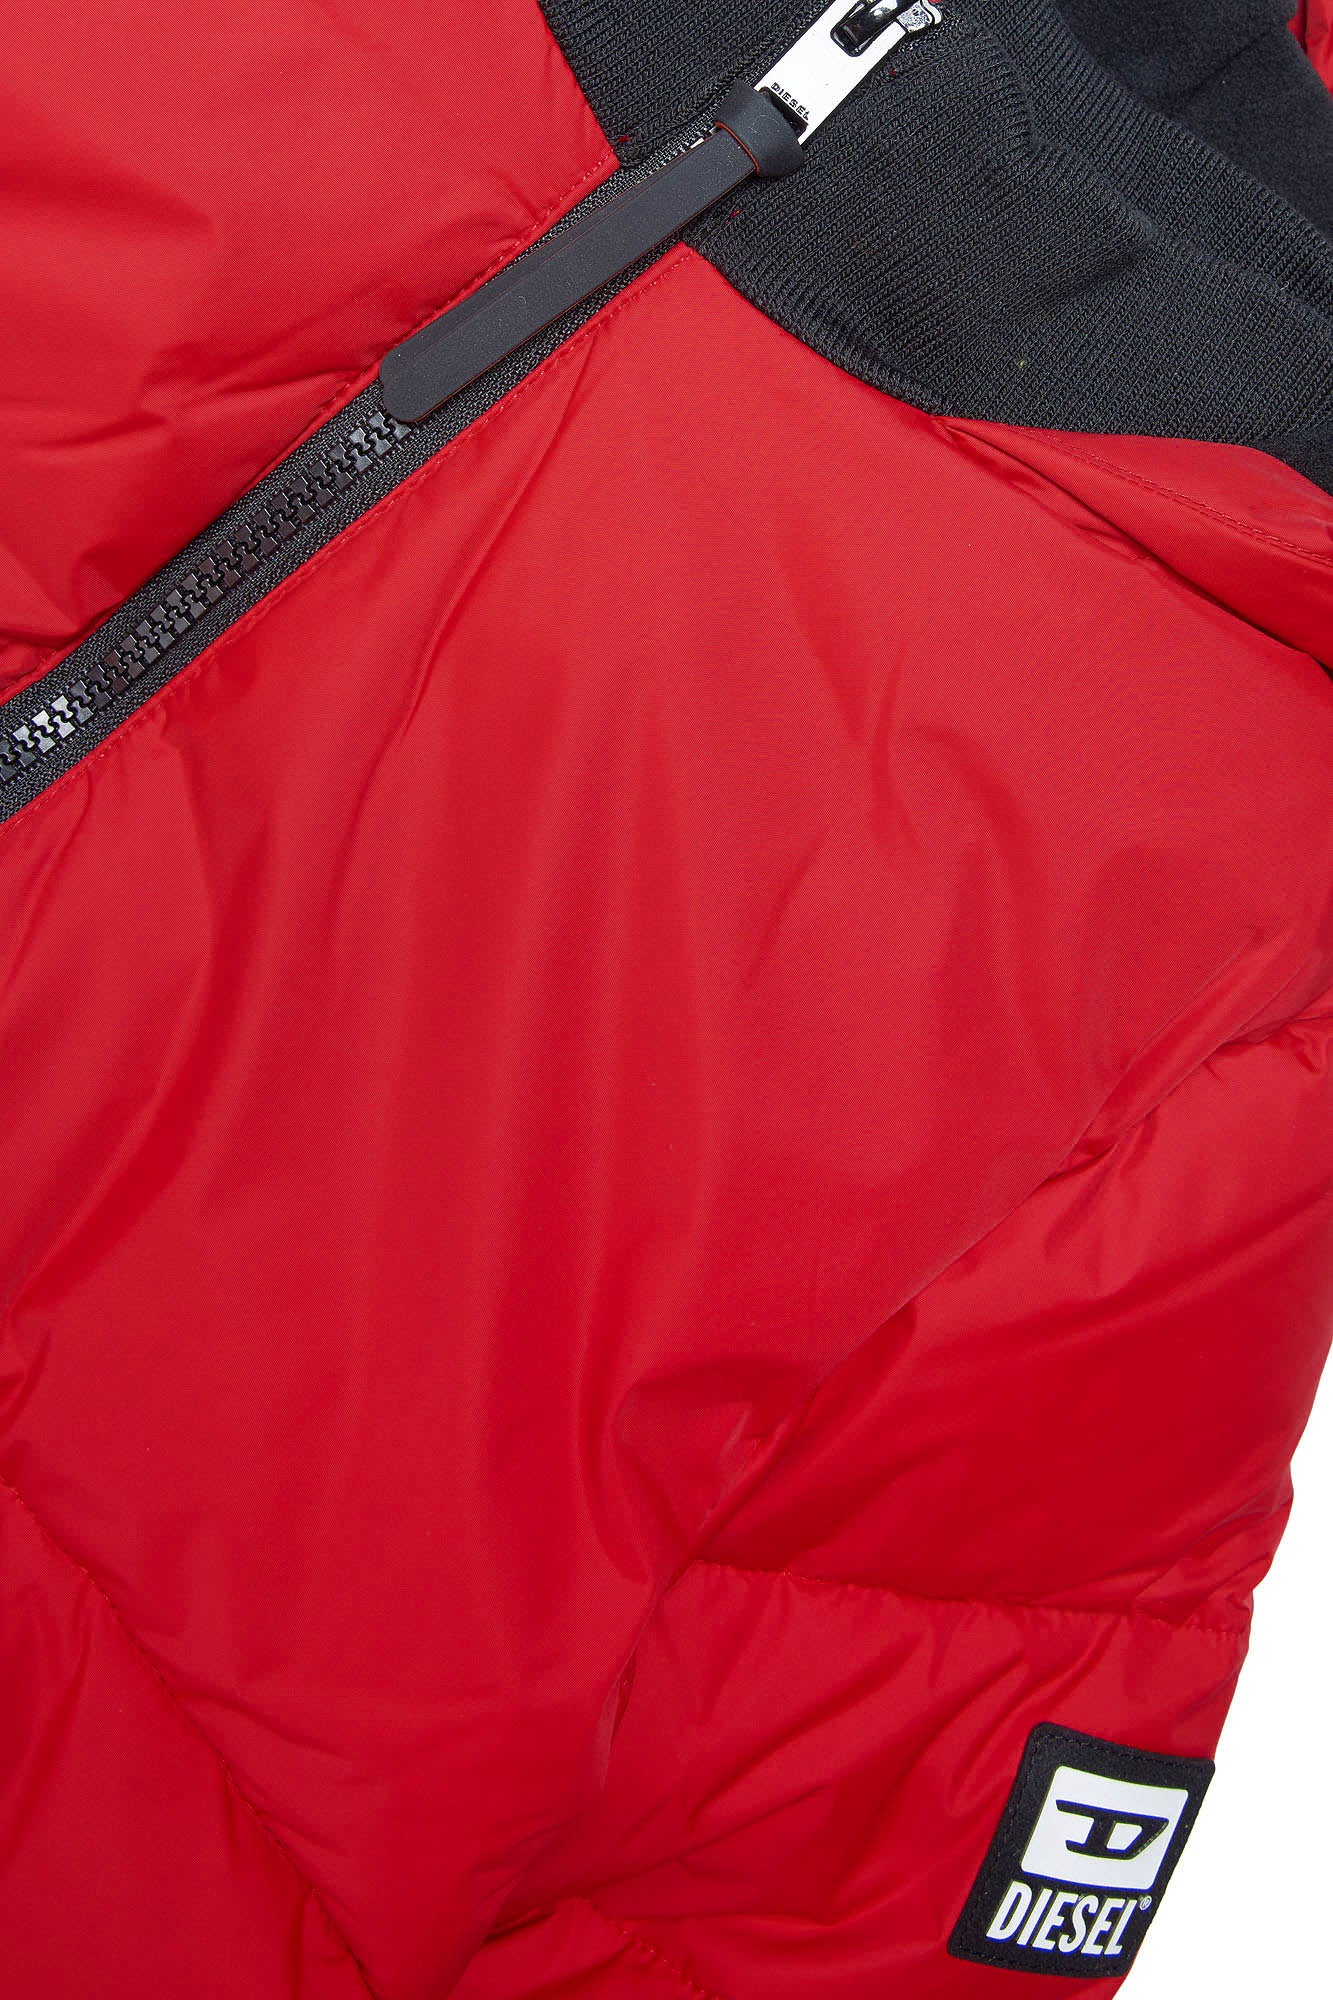 Red down jacket with Diesel logo on the back